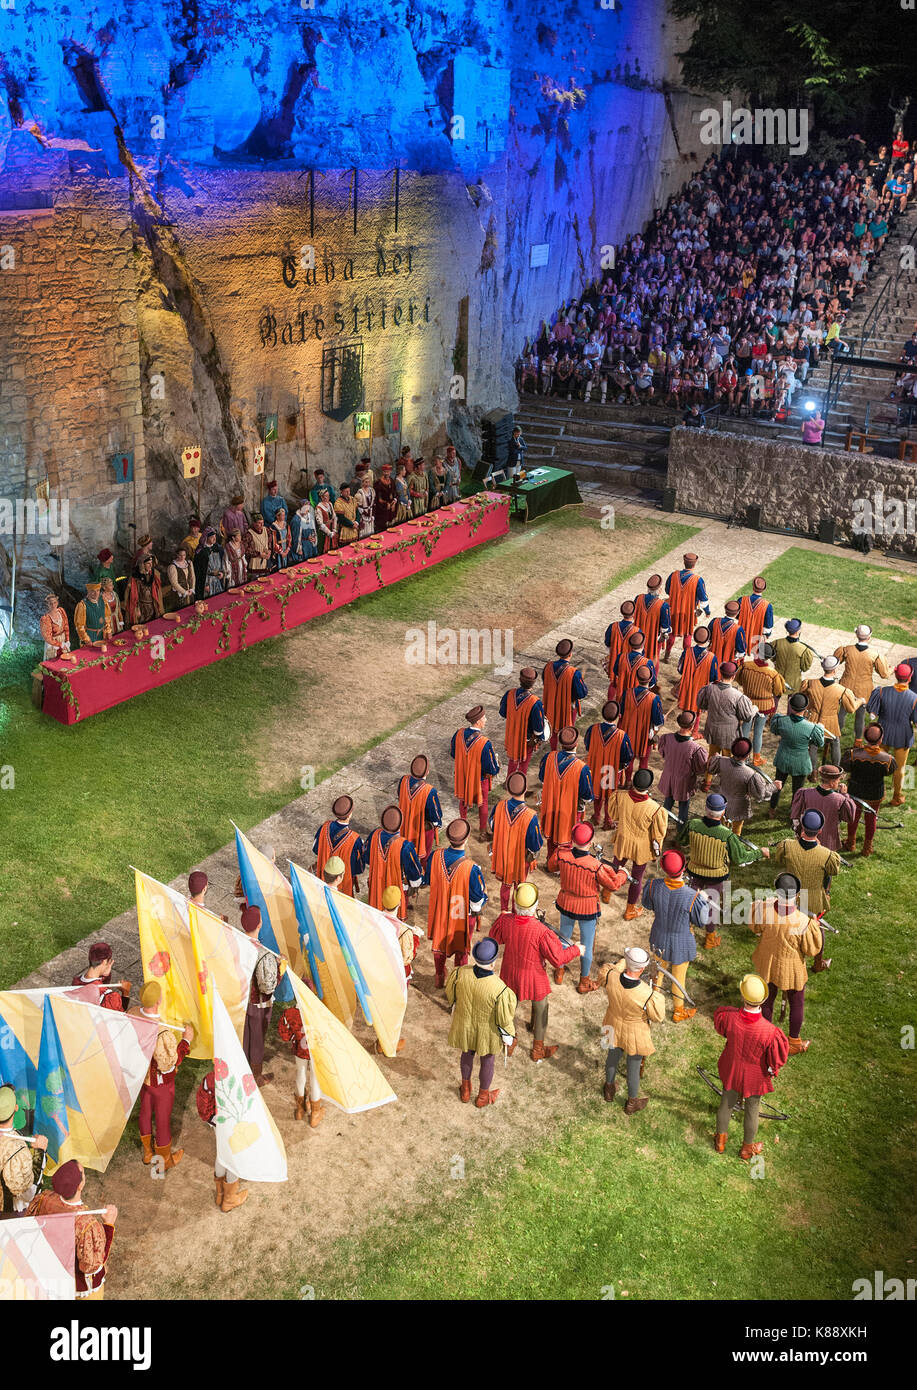 San Marinis dressed and performing in period costumes during the annual Medieval Days Festival held in San Marino. Stock Photo